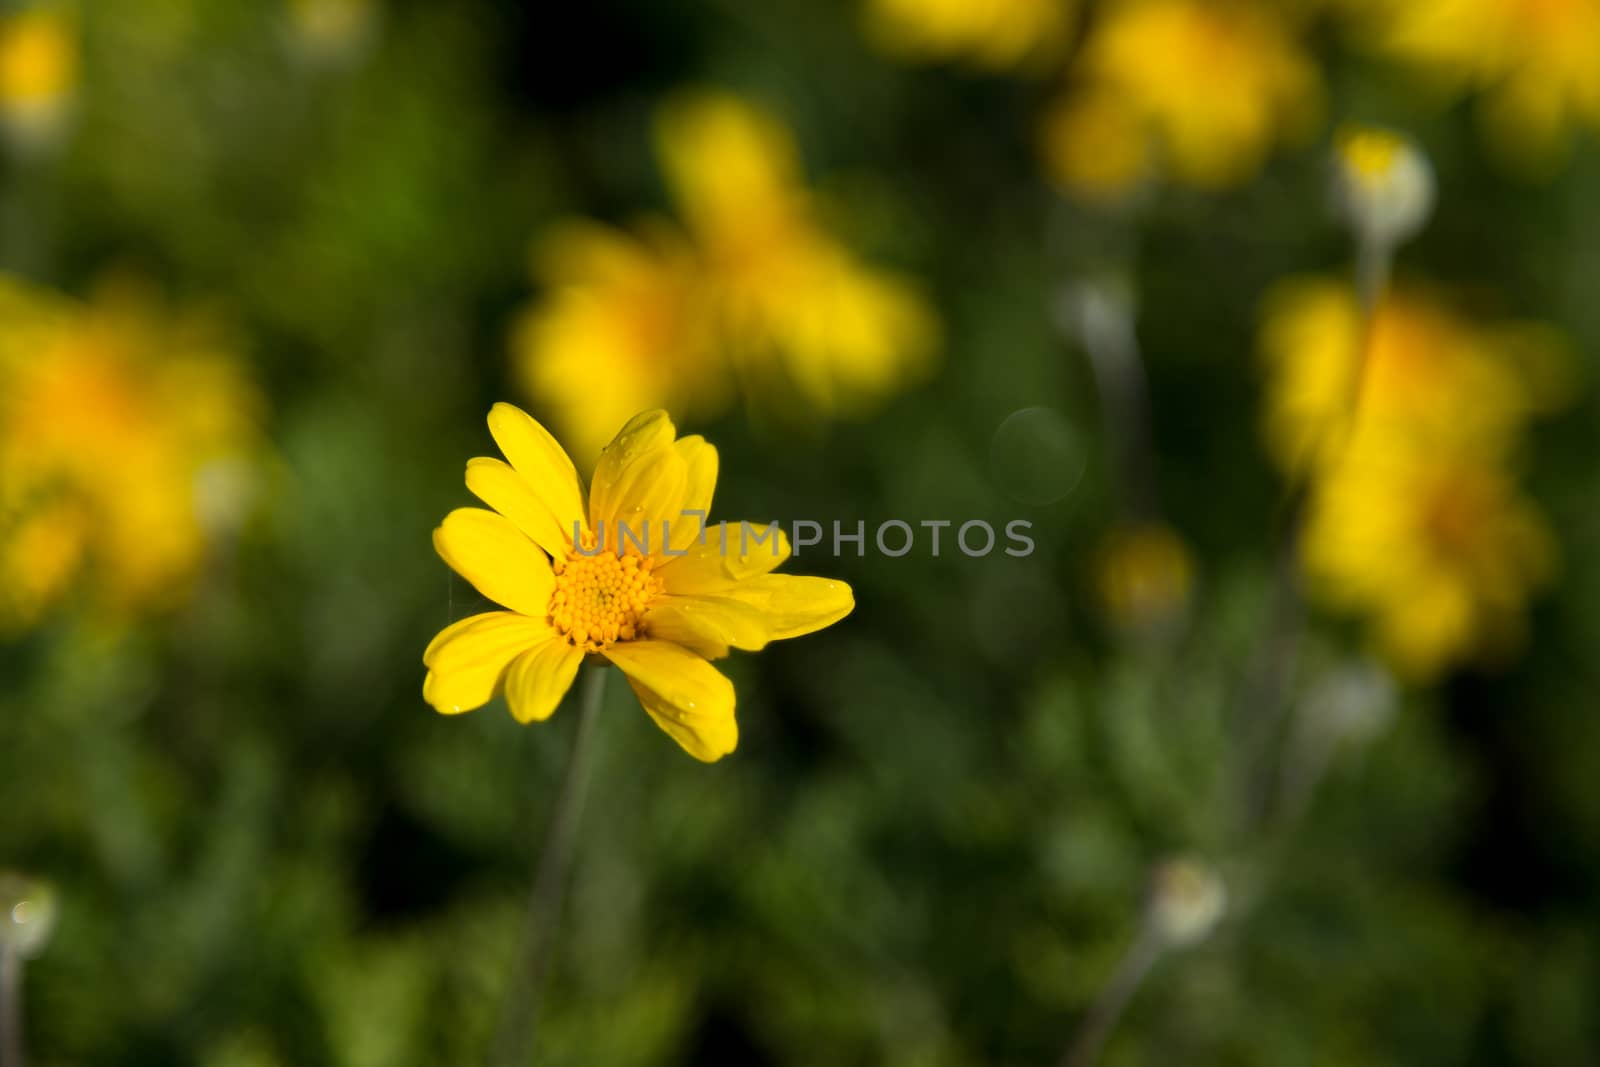 Little yellow flowers with green leaves by 25ehaag6